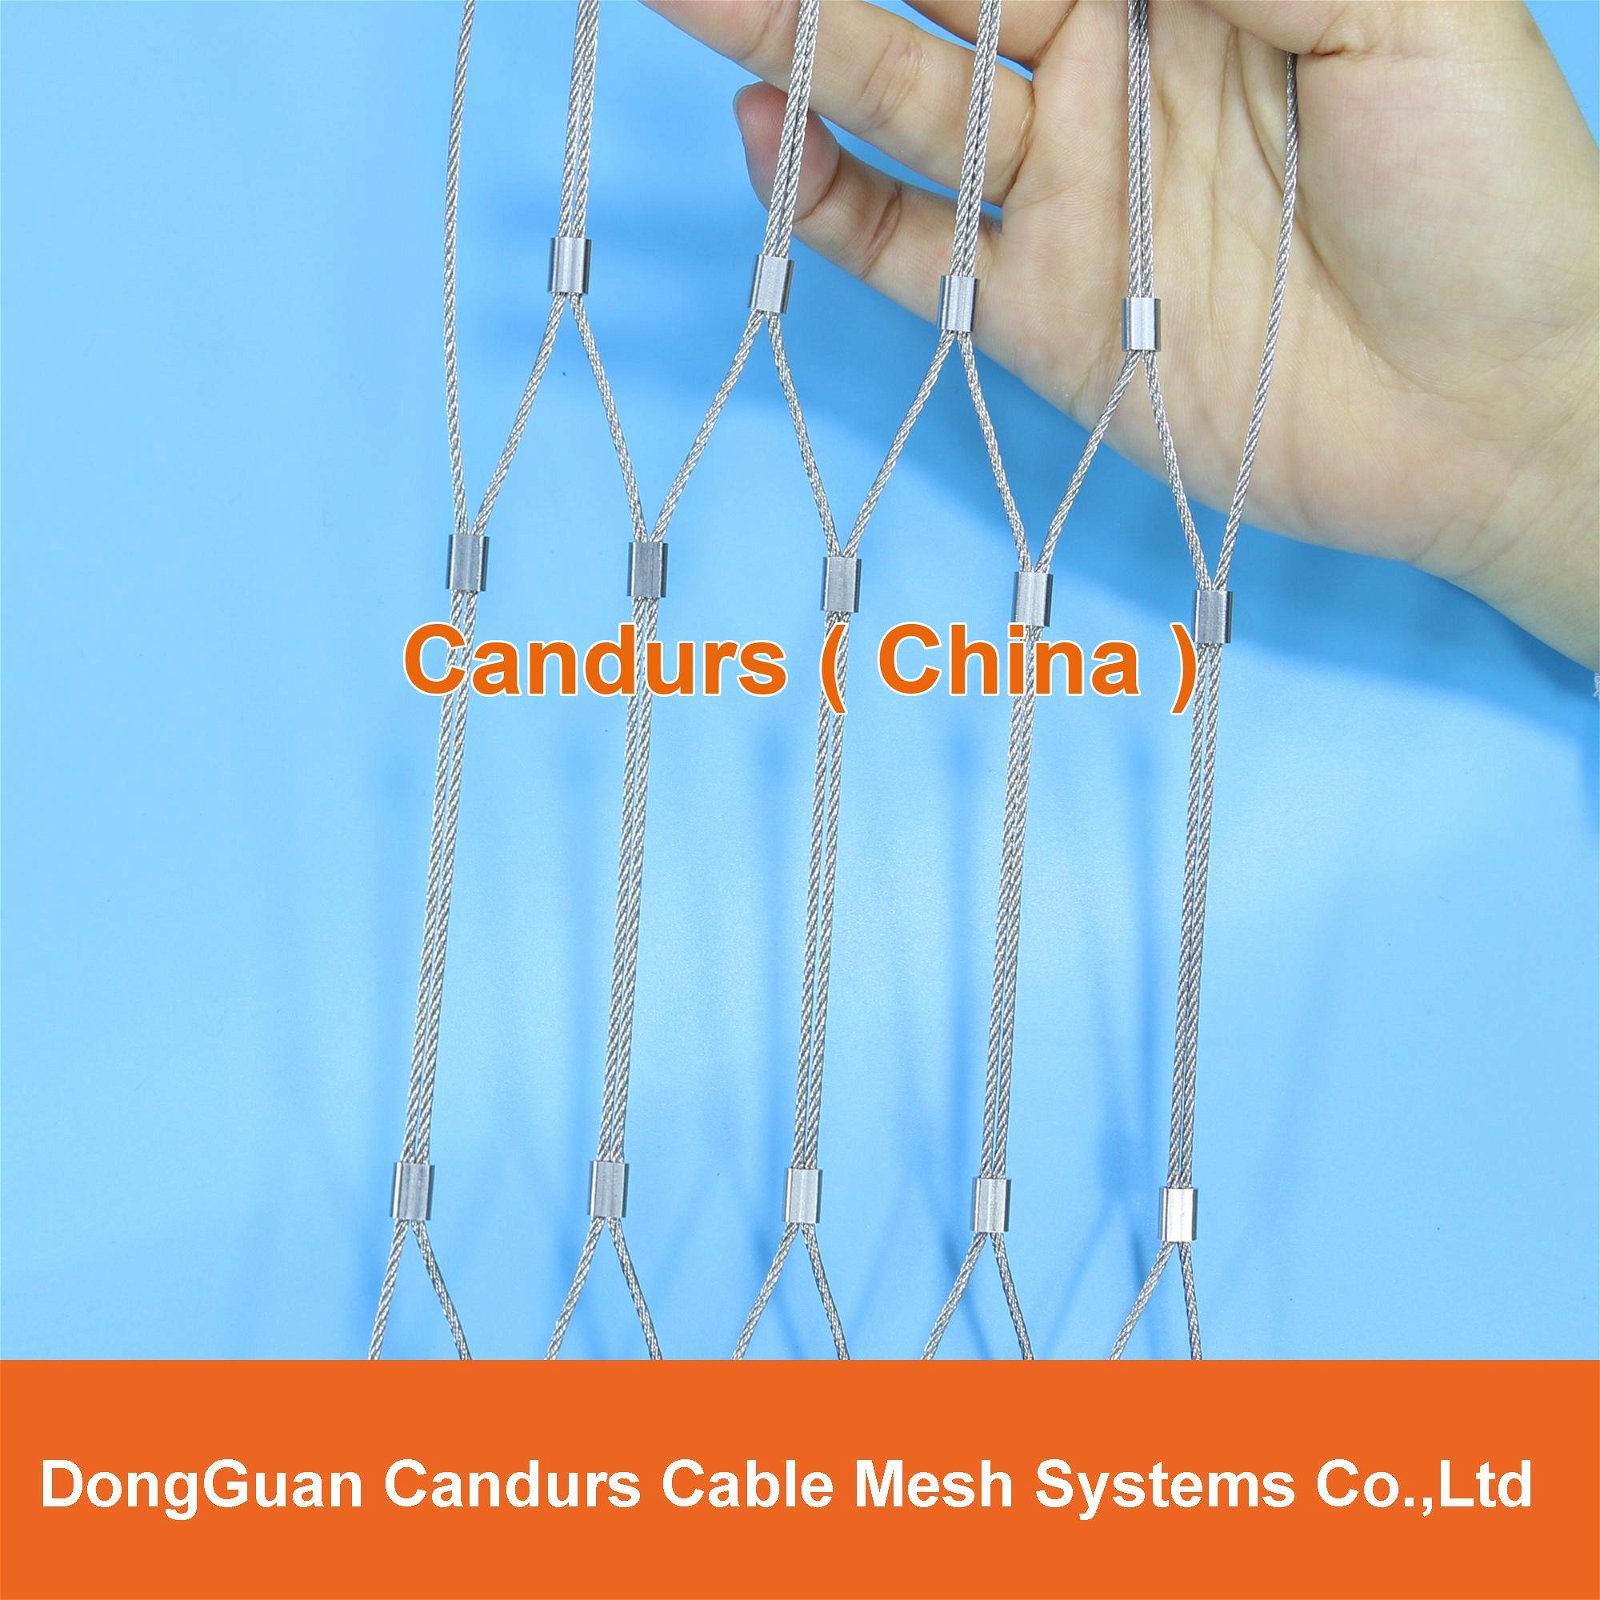 3 mm 120 mm x 210 mm AISI 316 Flexible Inox Cable Mesh Netting 11